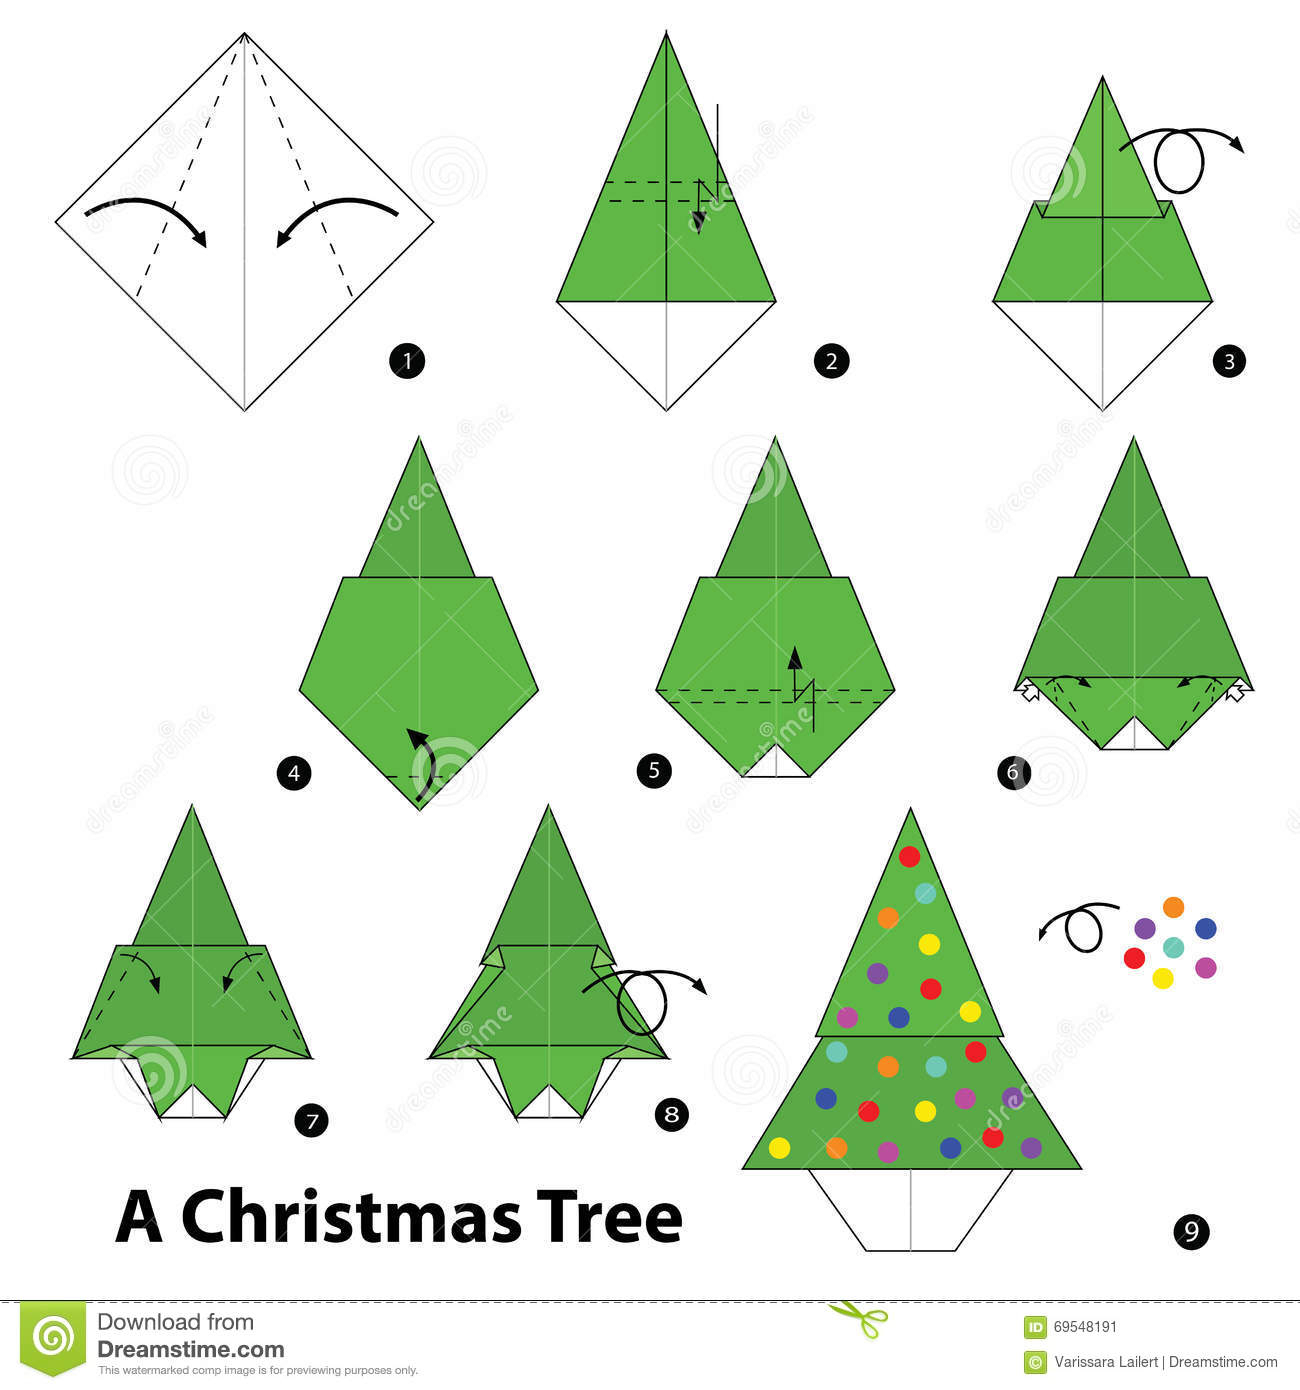 Origami Ornaments Instructions Christmas Tree Origami Christmas Tree How To Make D Origami